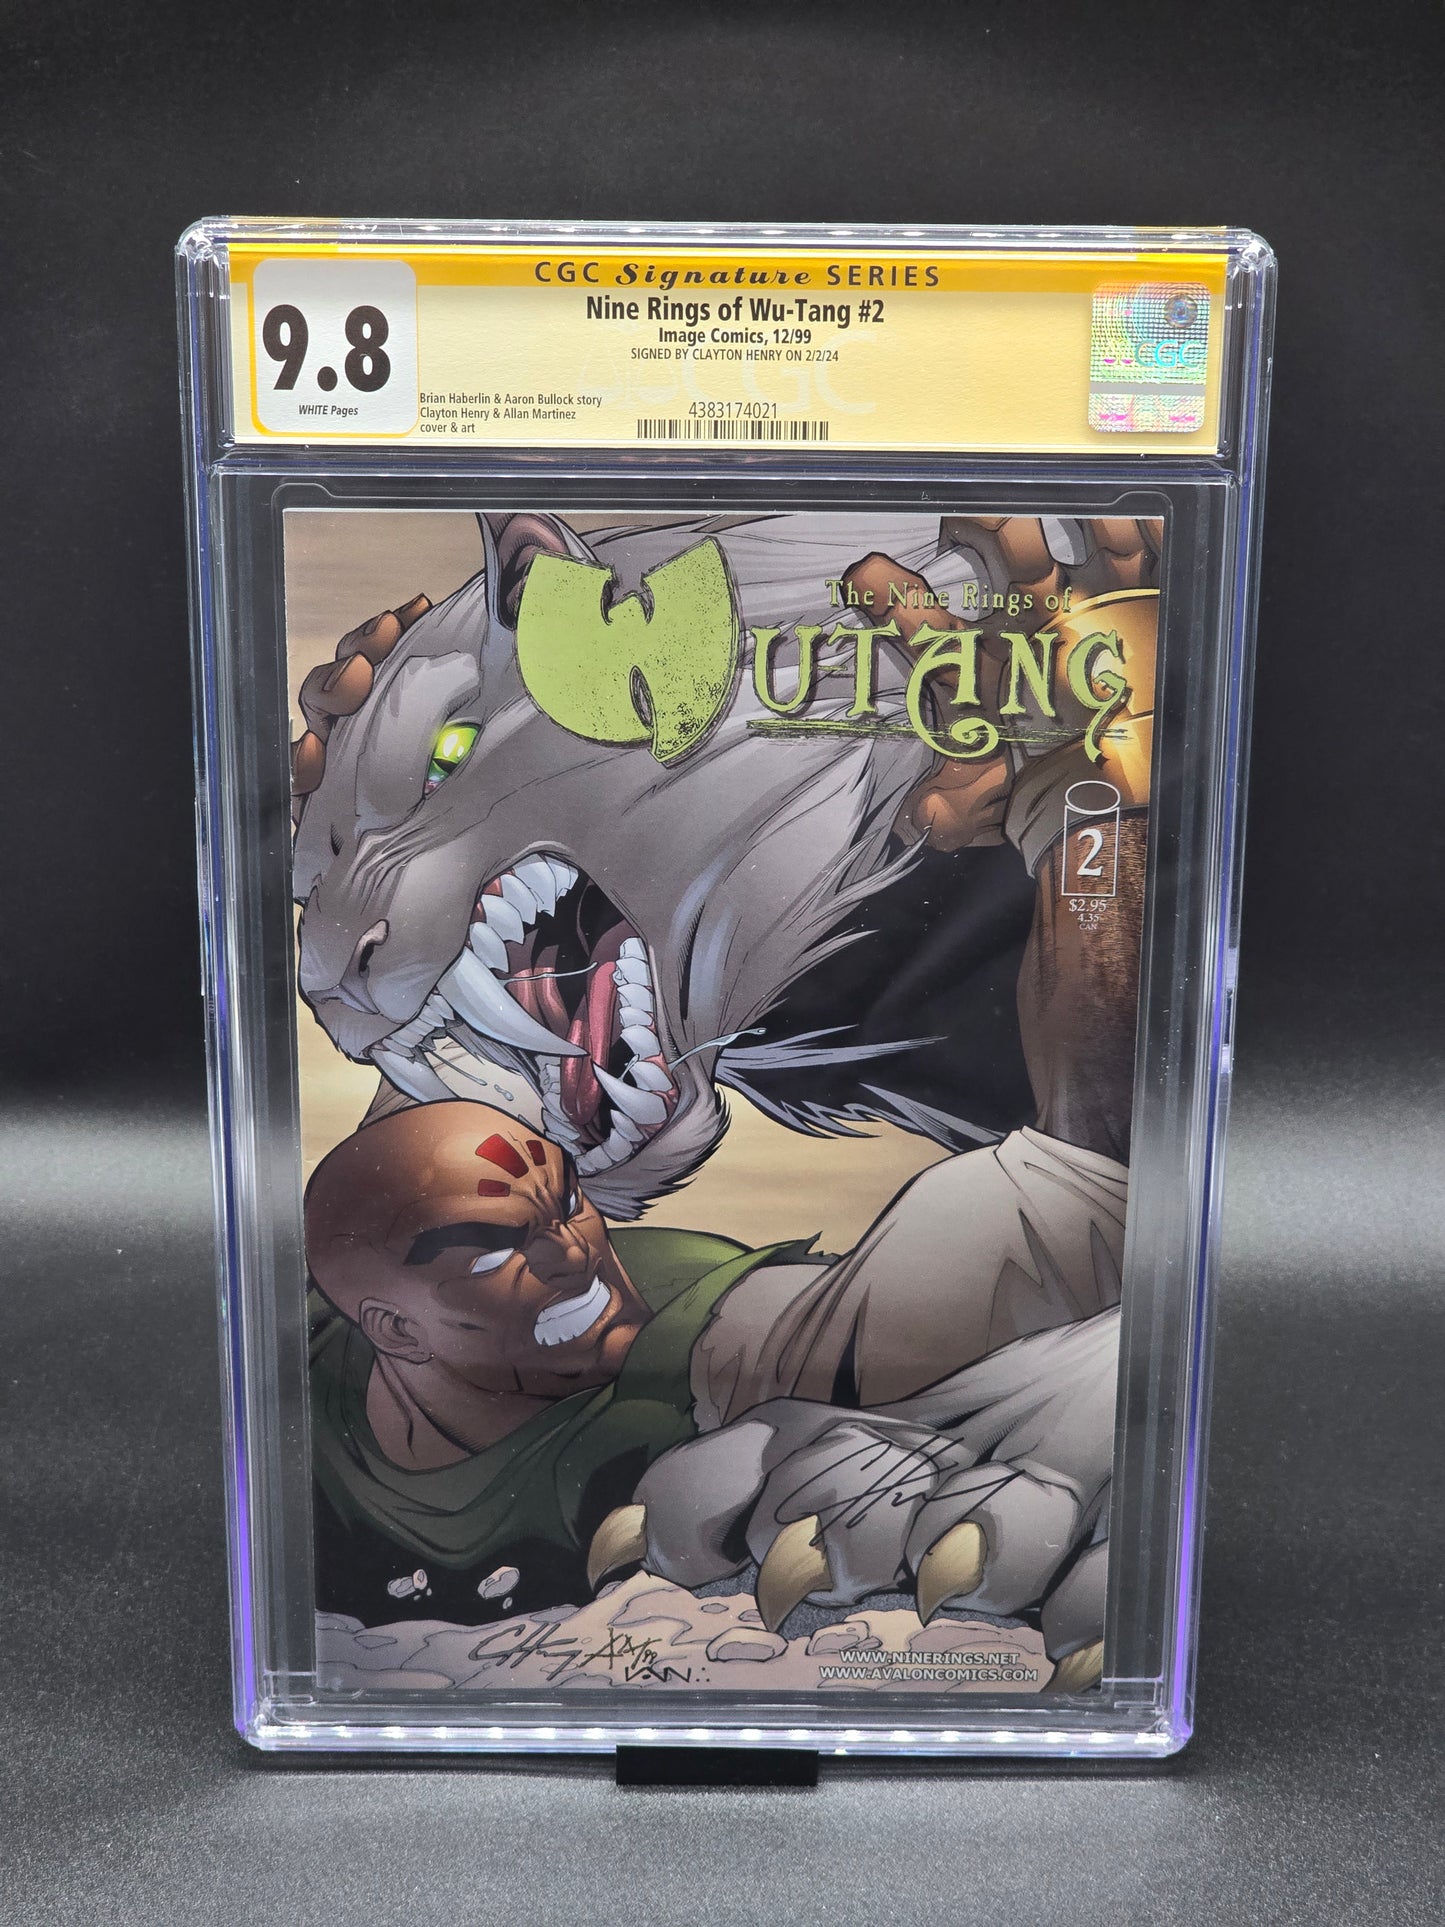 Nine Rings of Wu-Tang #2 12/99 CGC SS 9.8 variant cover Signed by Clayton Henry